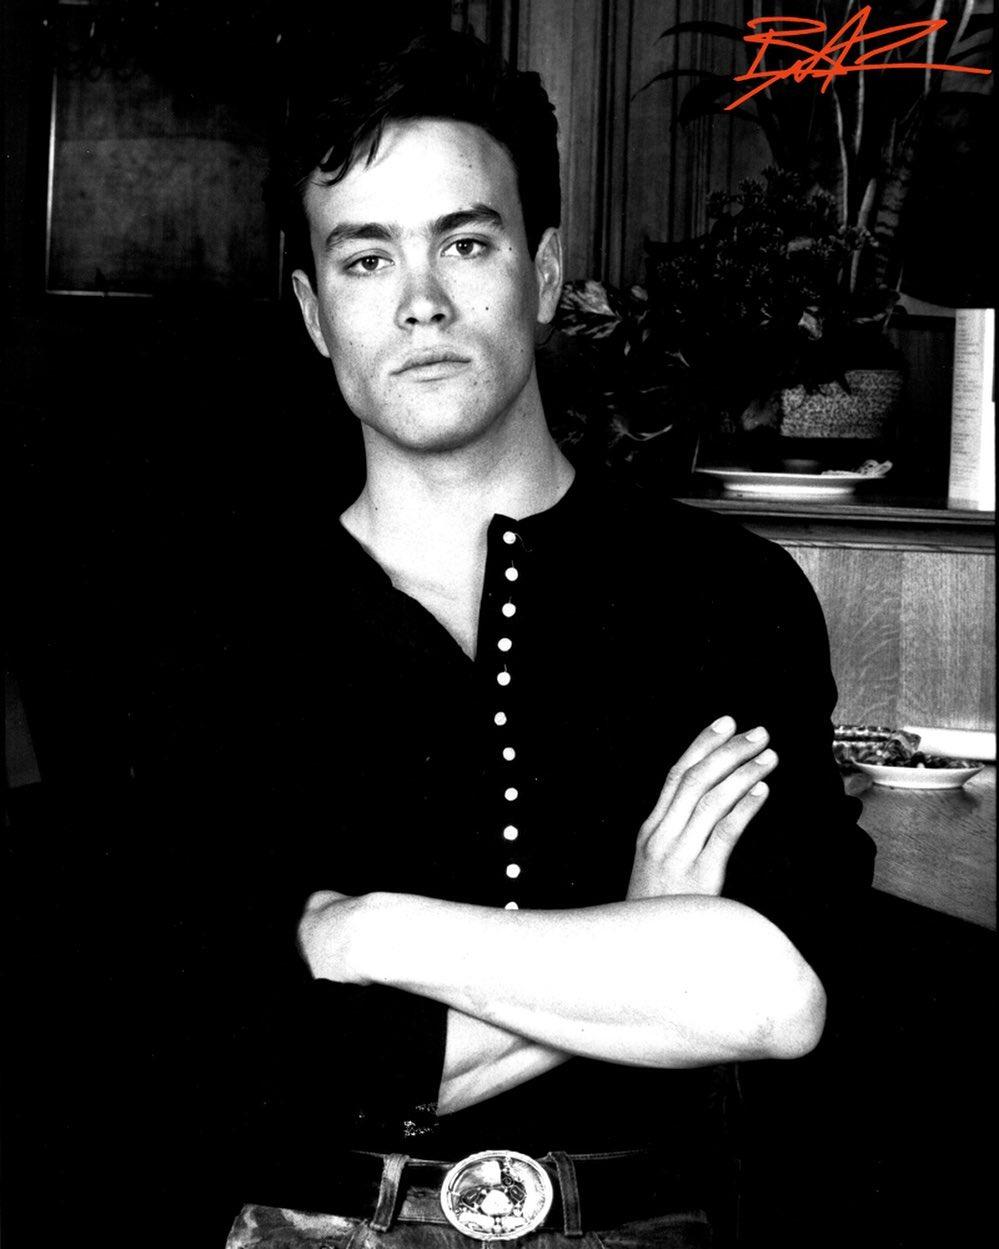 A black and white themed photo of Brandon Lee in a button-down shirt.